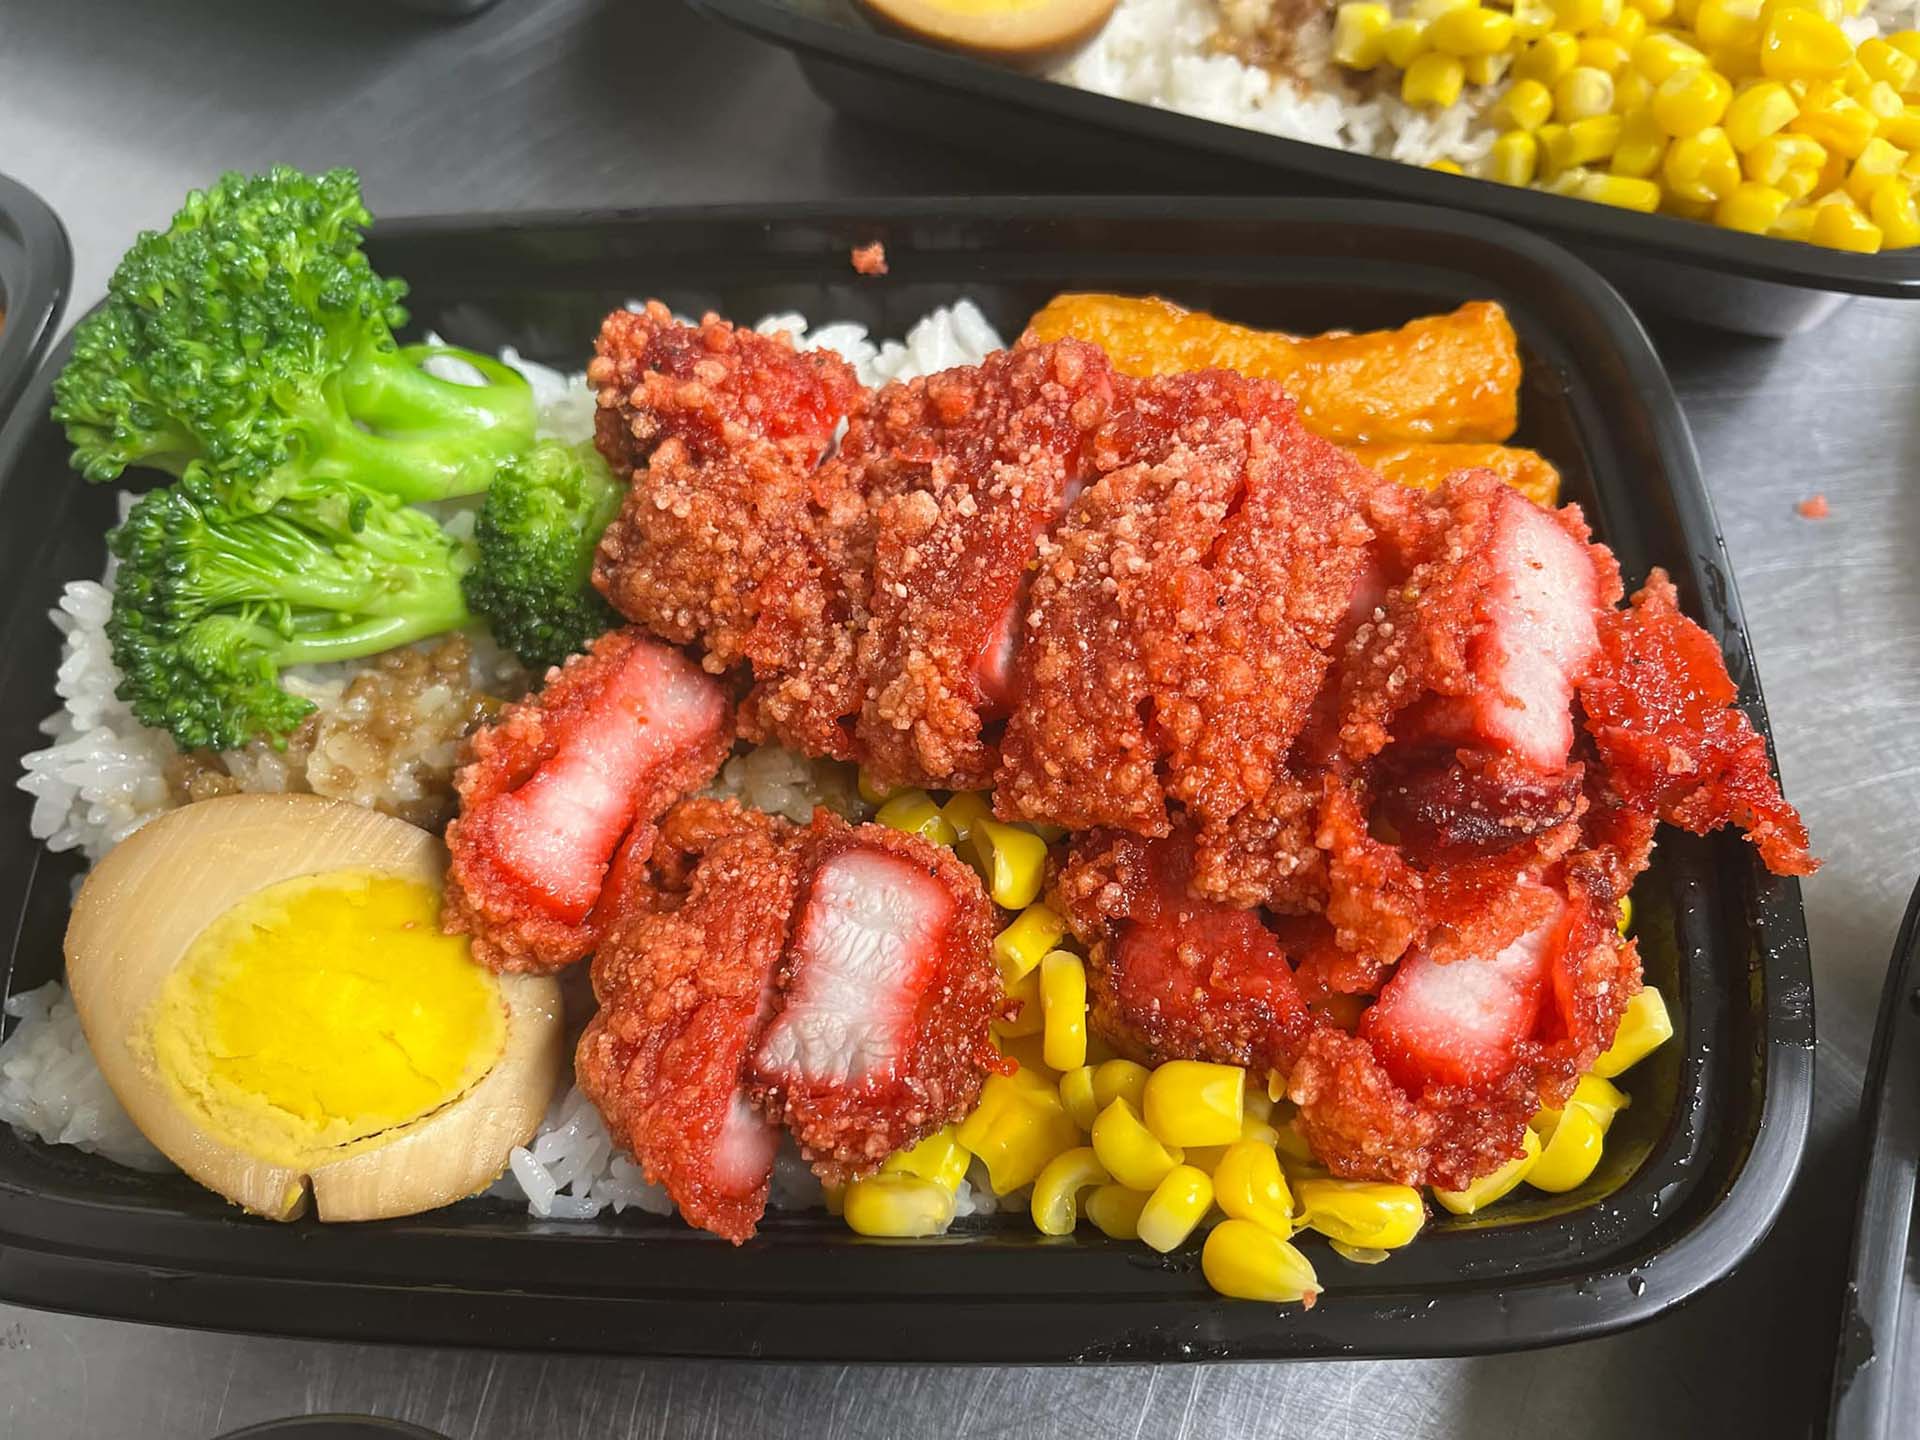 A red pork chop bento wit corn and egg.